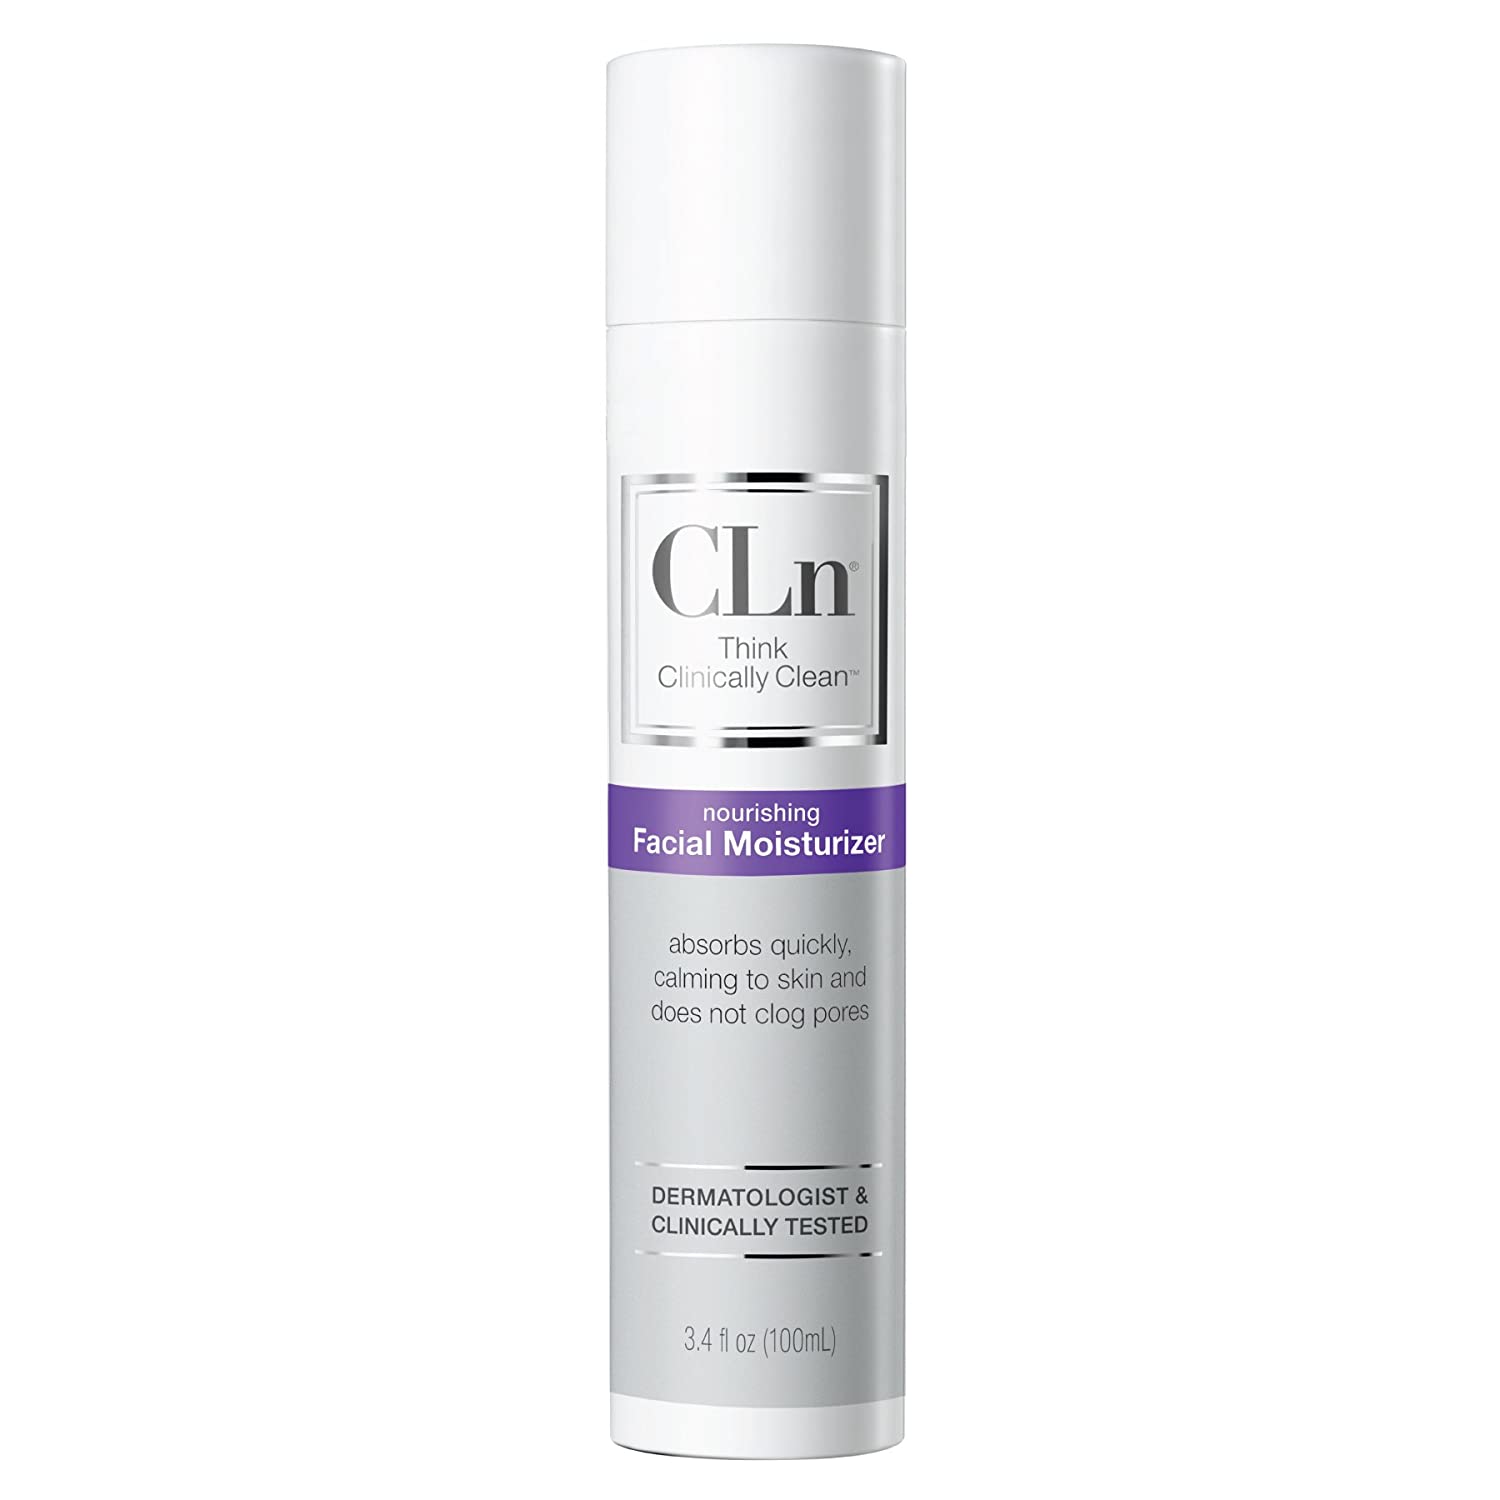 cln face lotion, one of the best face moisturizers for eczema